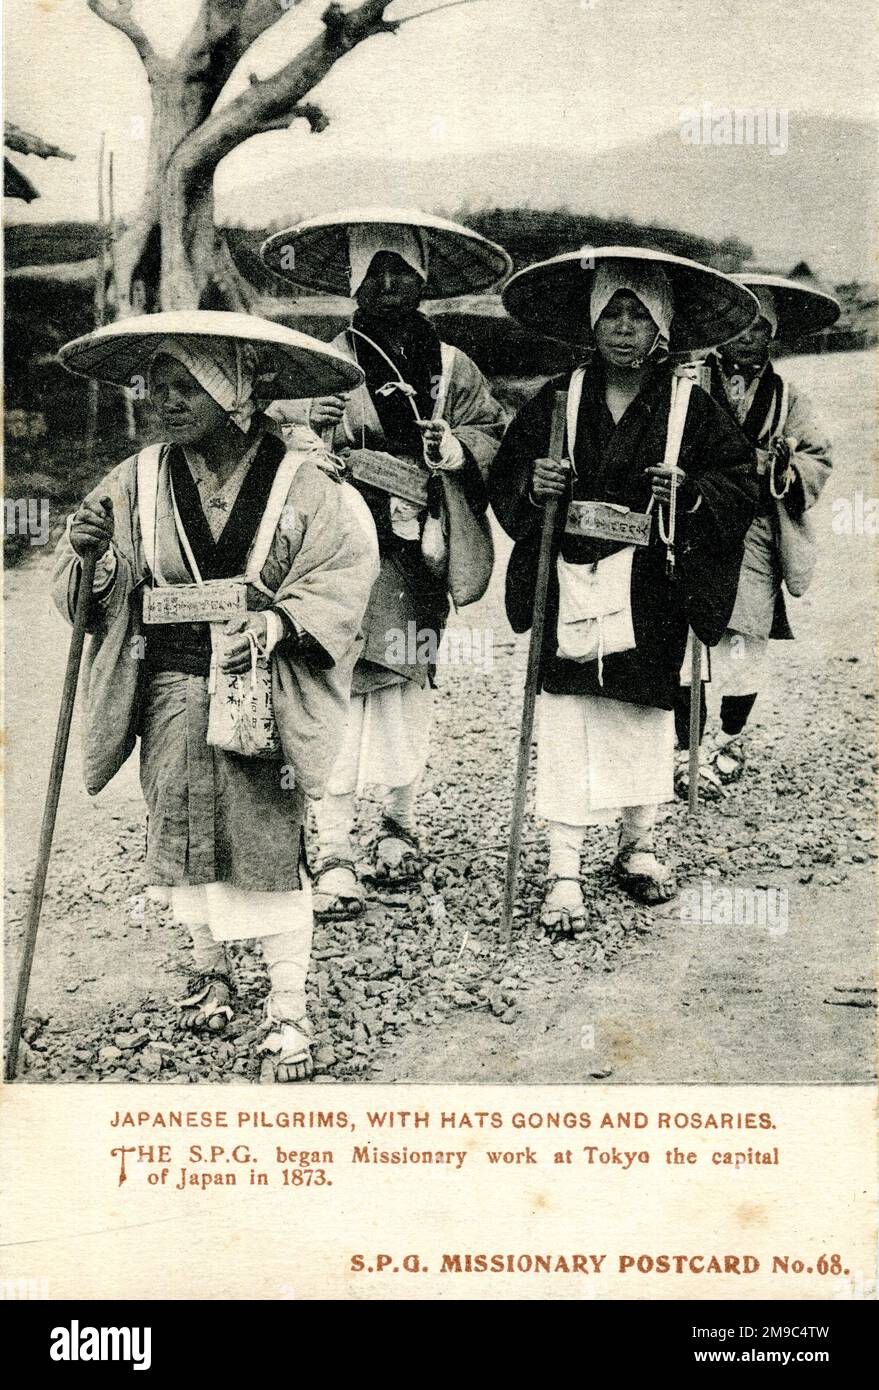 Japanese pilgrims with hats, gongs and rosaries - Society for the Propagation of the Gospel in Foreign Parts Stock Photo